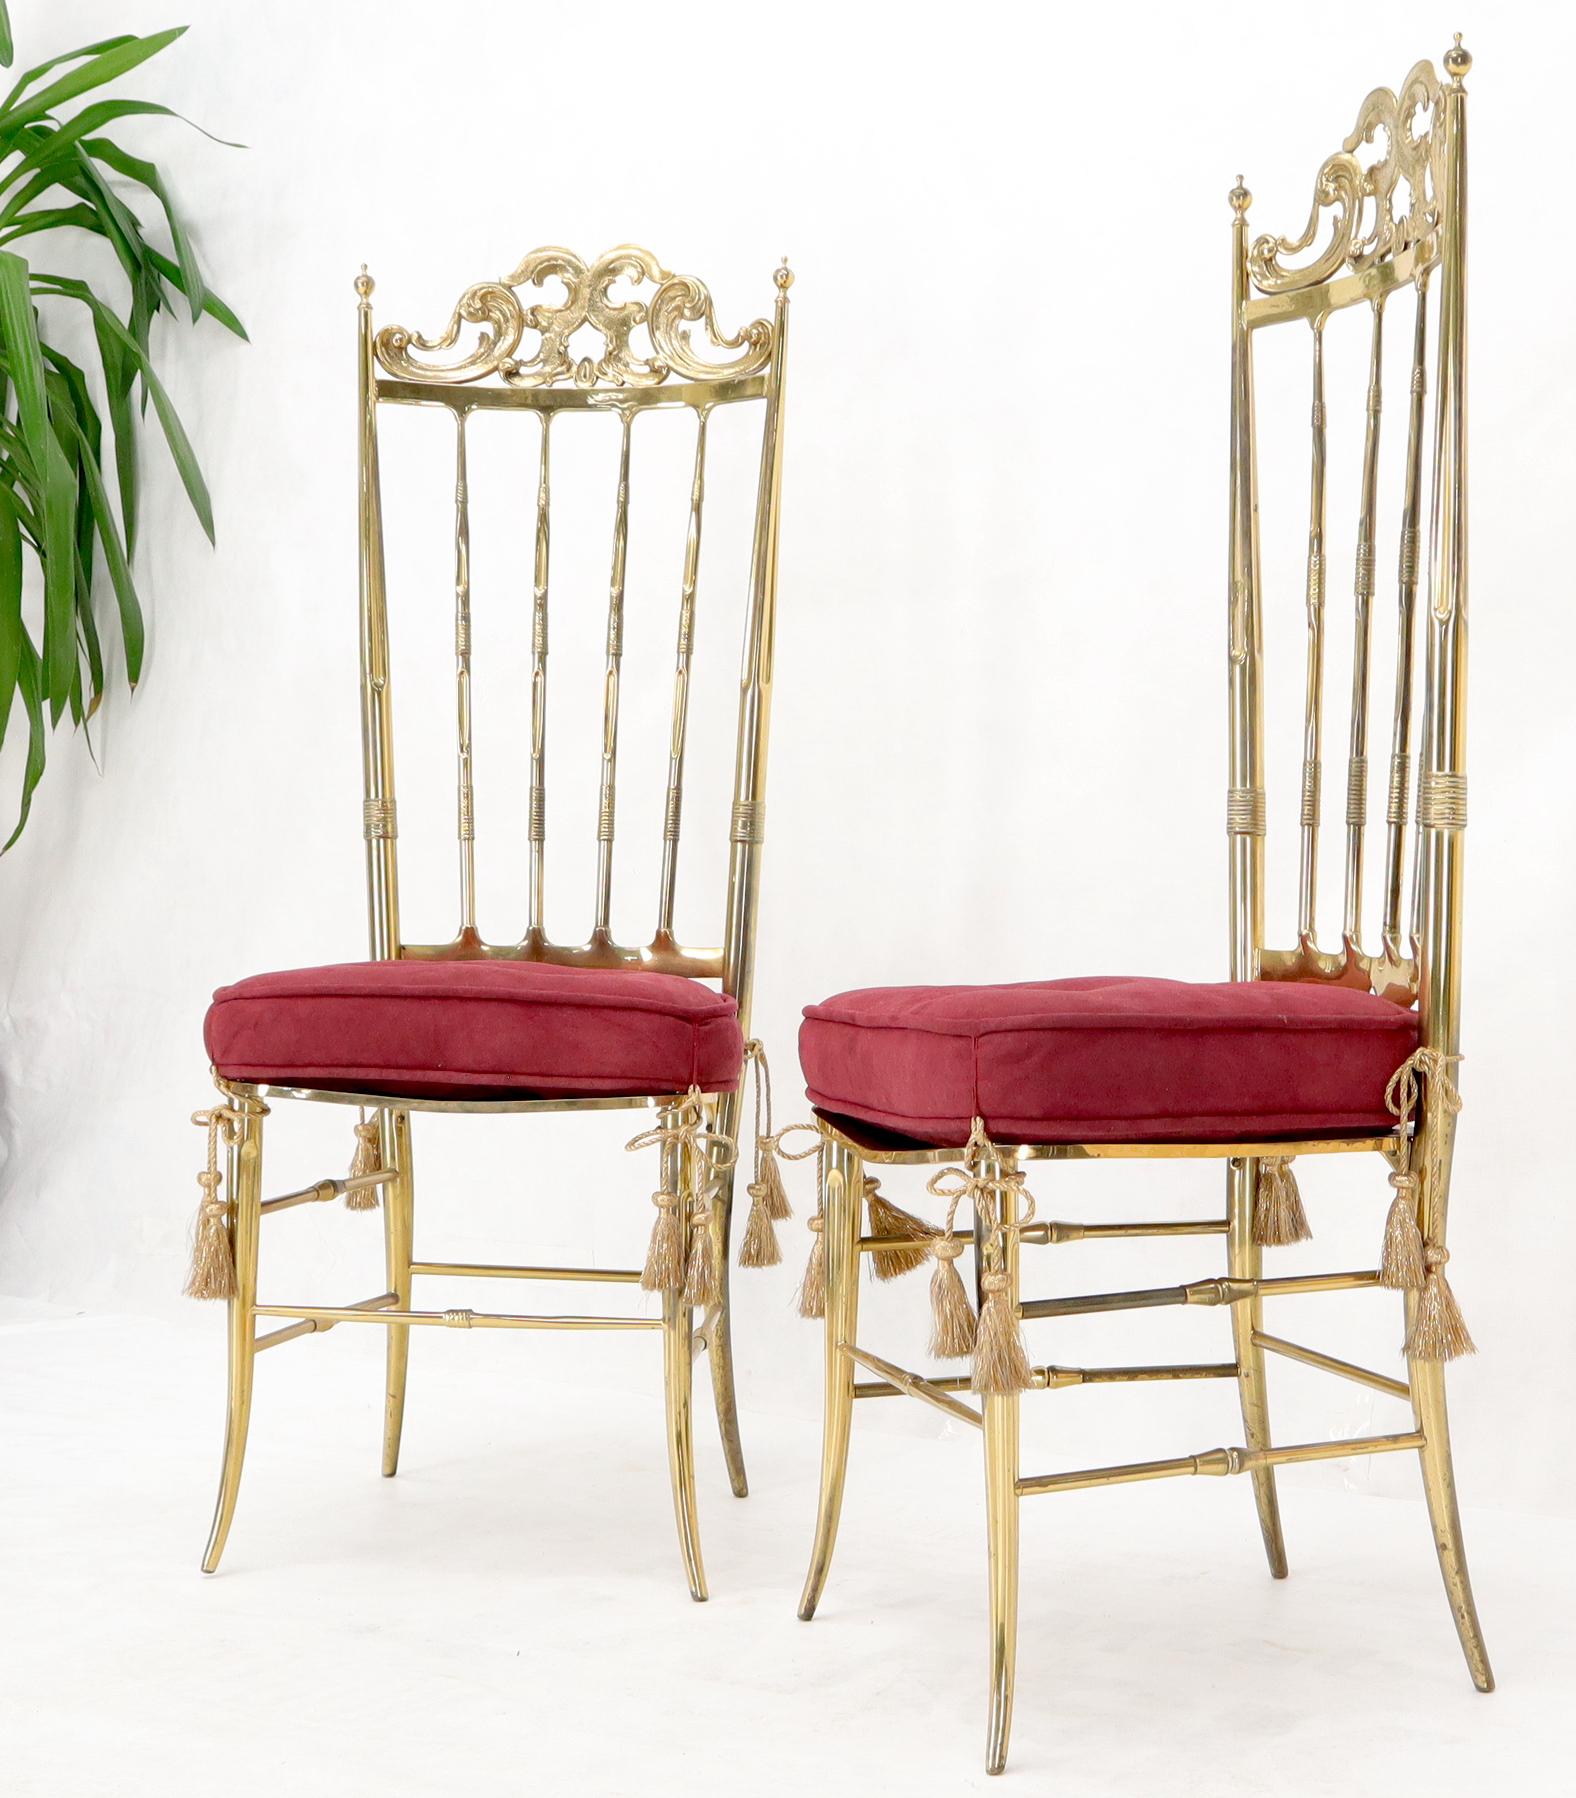 Hollywood Regency Set of 2 Italian Solid Brass Chiavari Chairs from 1950s Salmon Red Upholstery For Sale